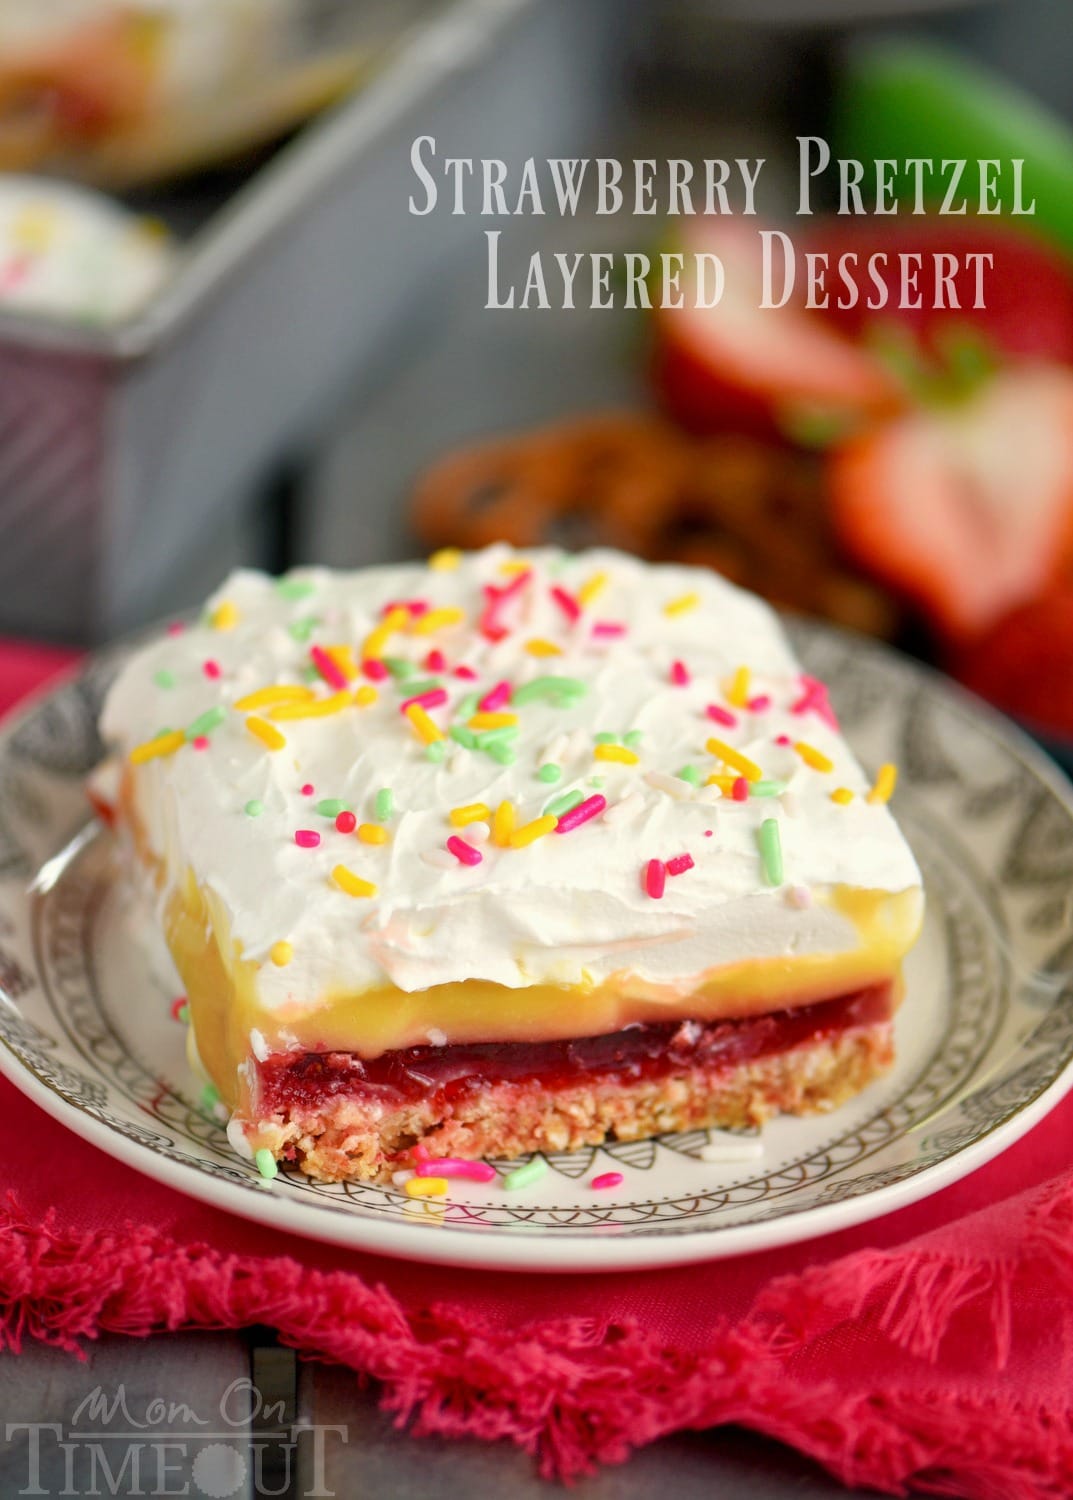 This easy No Bake Strawberry Pretzel Layered Dessert is sure to become a new family favorite! A graham cracker-pretzel crust is topped with a sweet strawberry jell-o layer, rich vanilla pudding and creamy whipped topping! Don't forget the sprinkles!